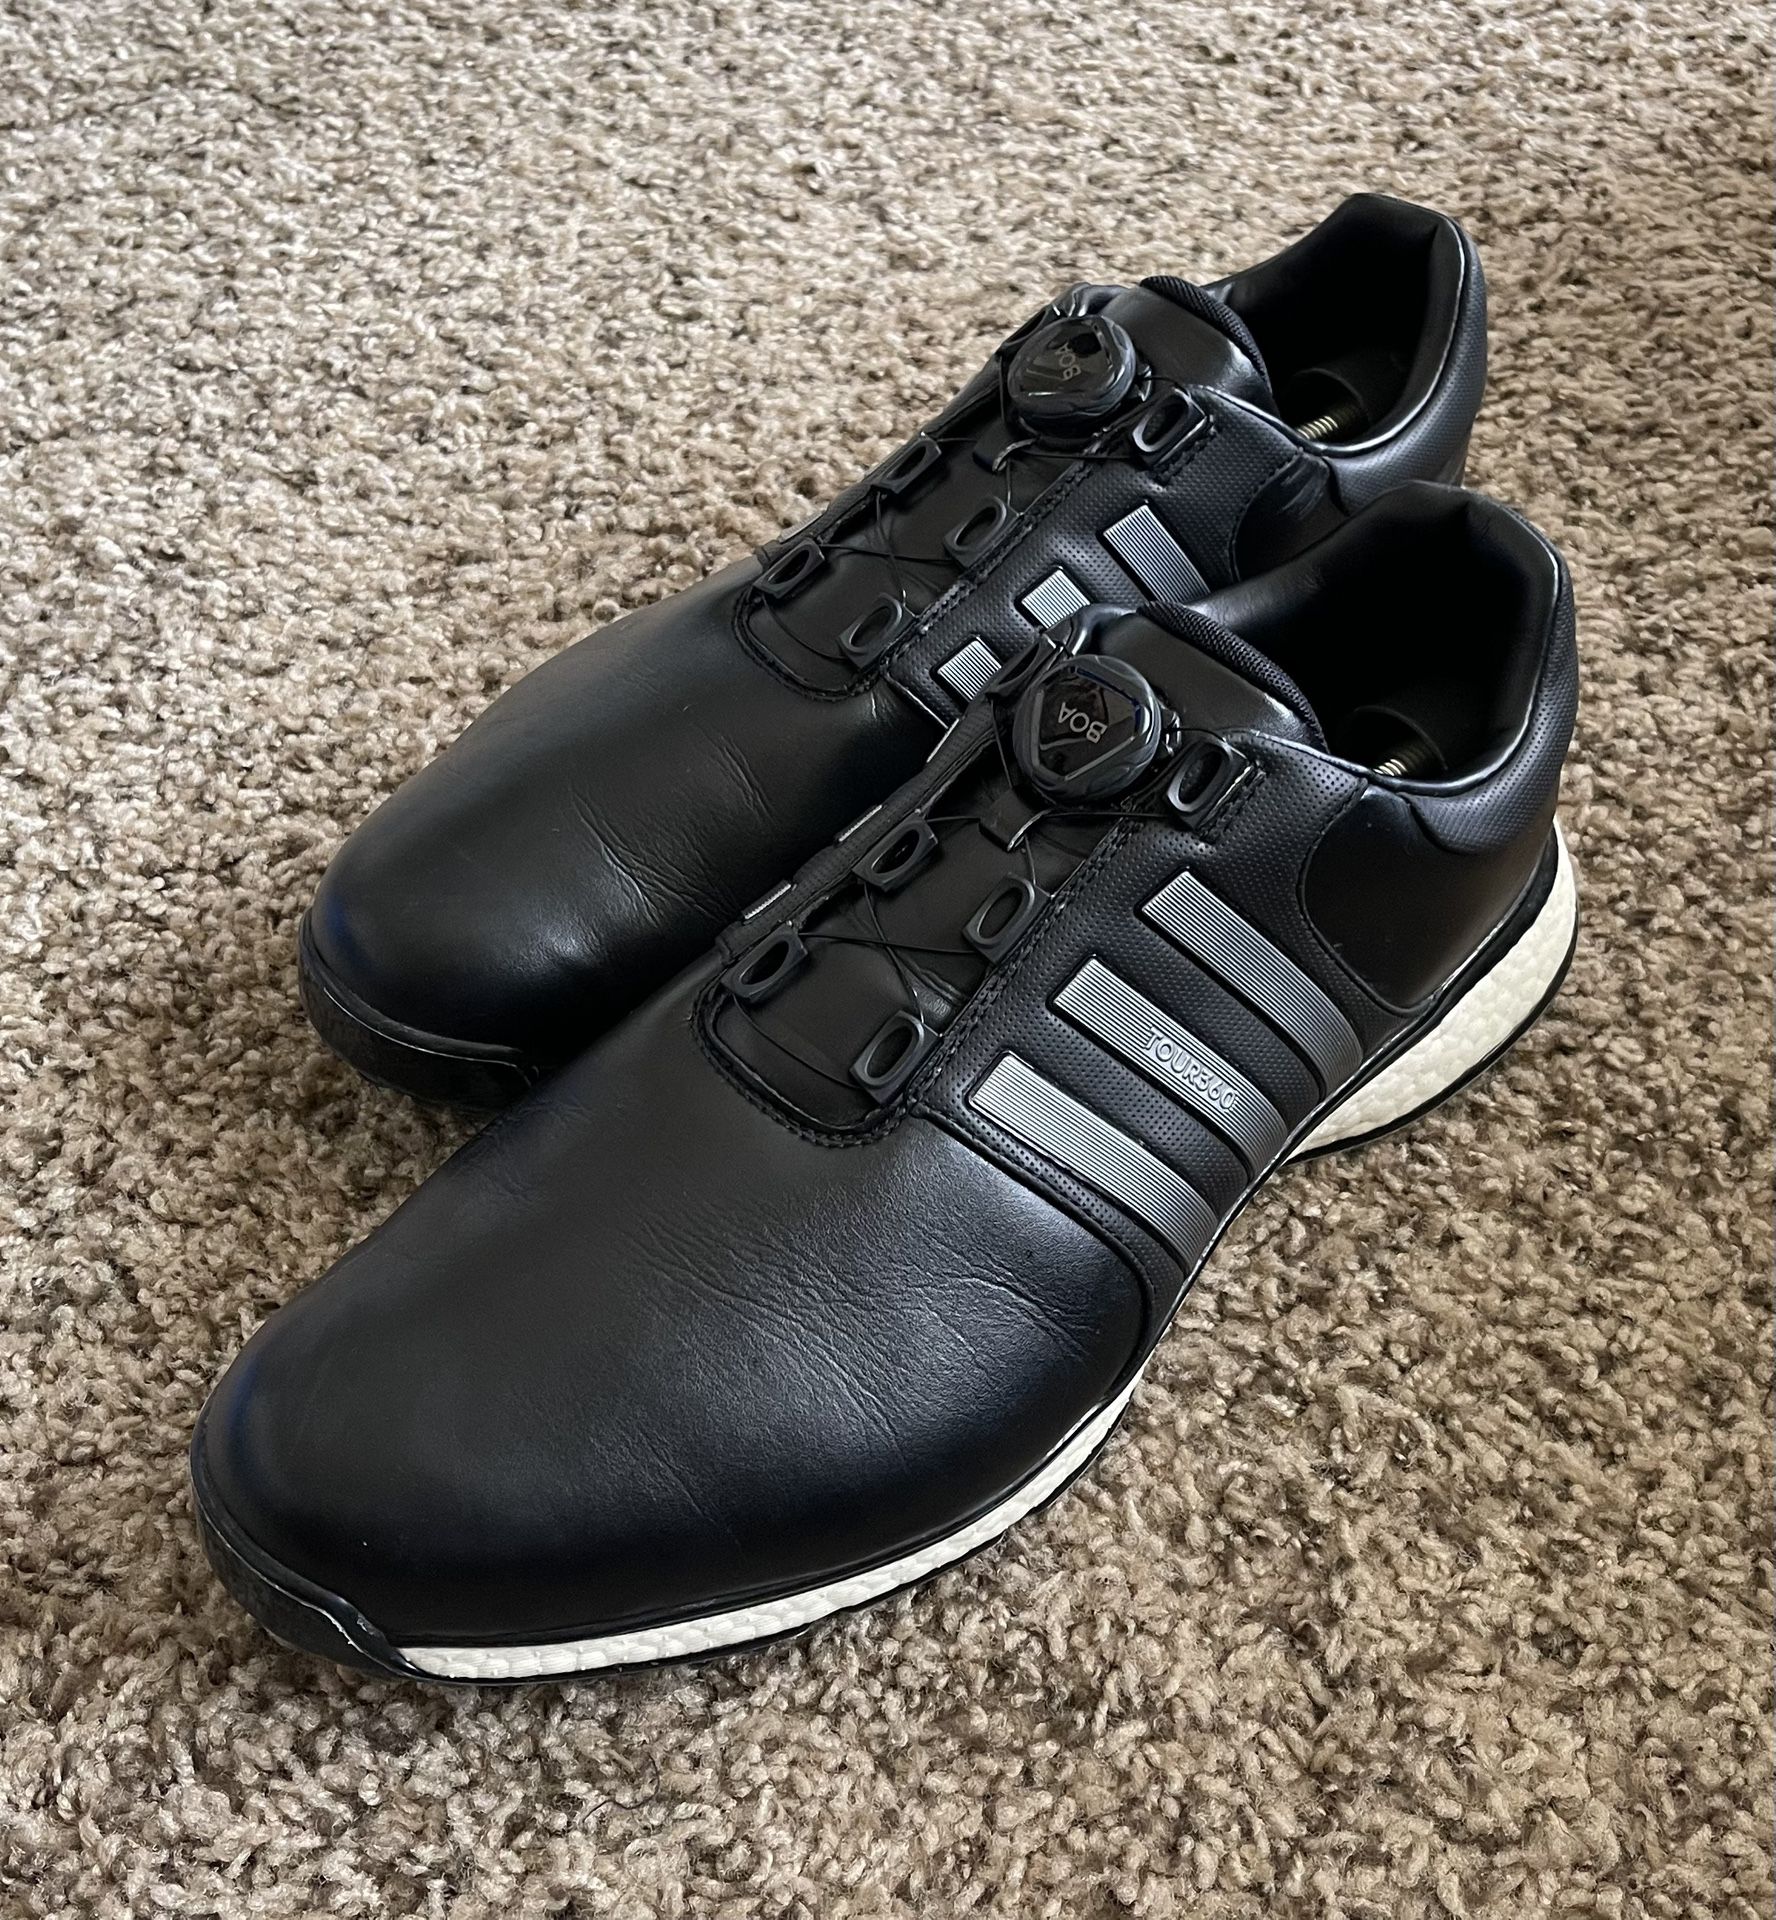 lunken Mediator ventilation Adidas Tour 360 BOA Spikeless Golf Shoes Men's Size 15 for Sale in Dallas,  TX - OfferUp